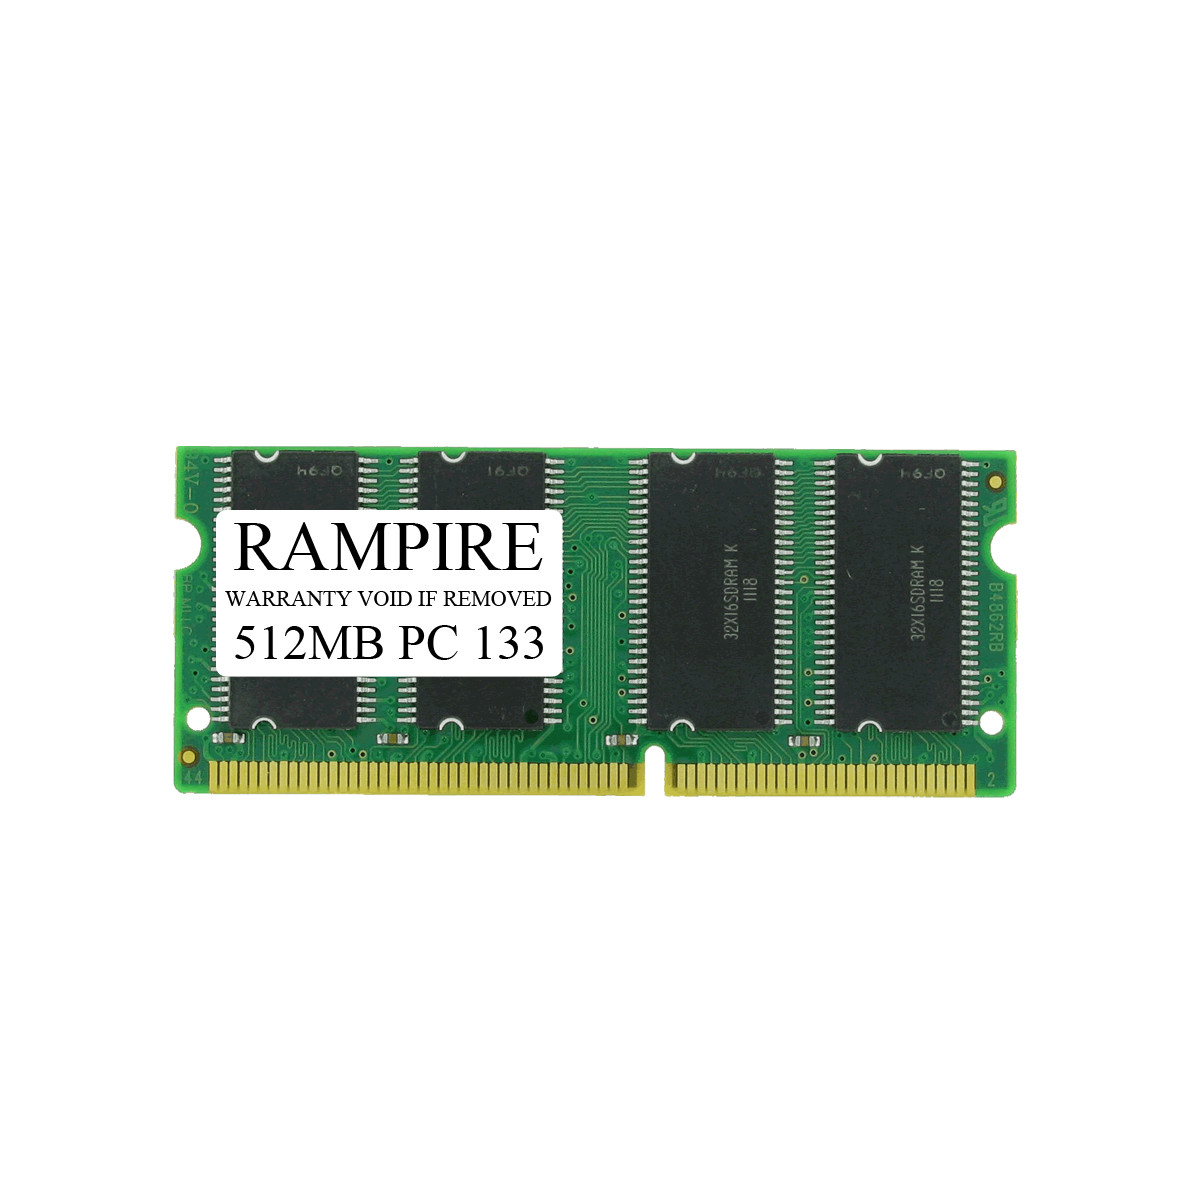 RAMPIRE 512MB PC 133 144-Pin SO-DIMM 3.3V 2Rx8 Non-ECC Unbuffered Memory for Laptop/Notebook PC and Mac